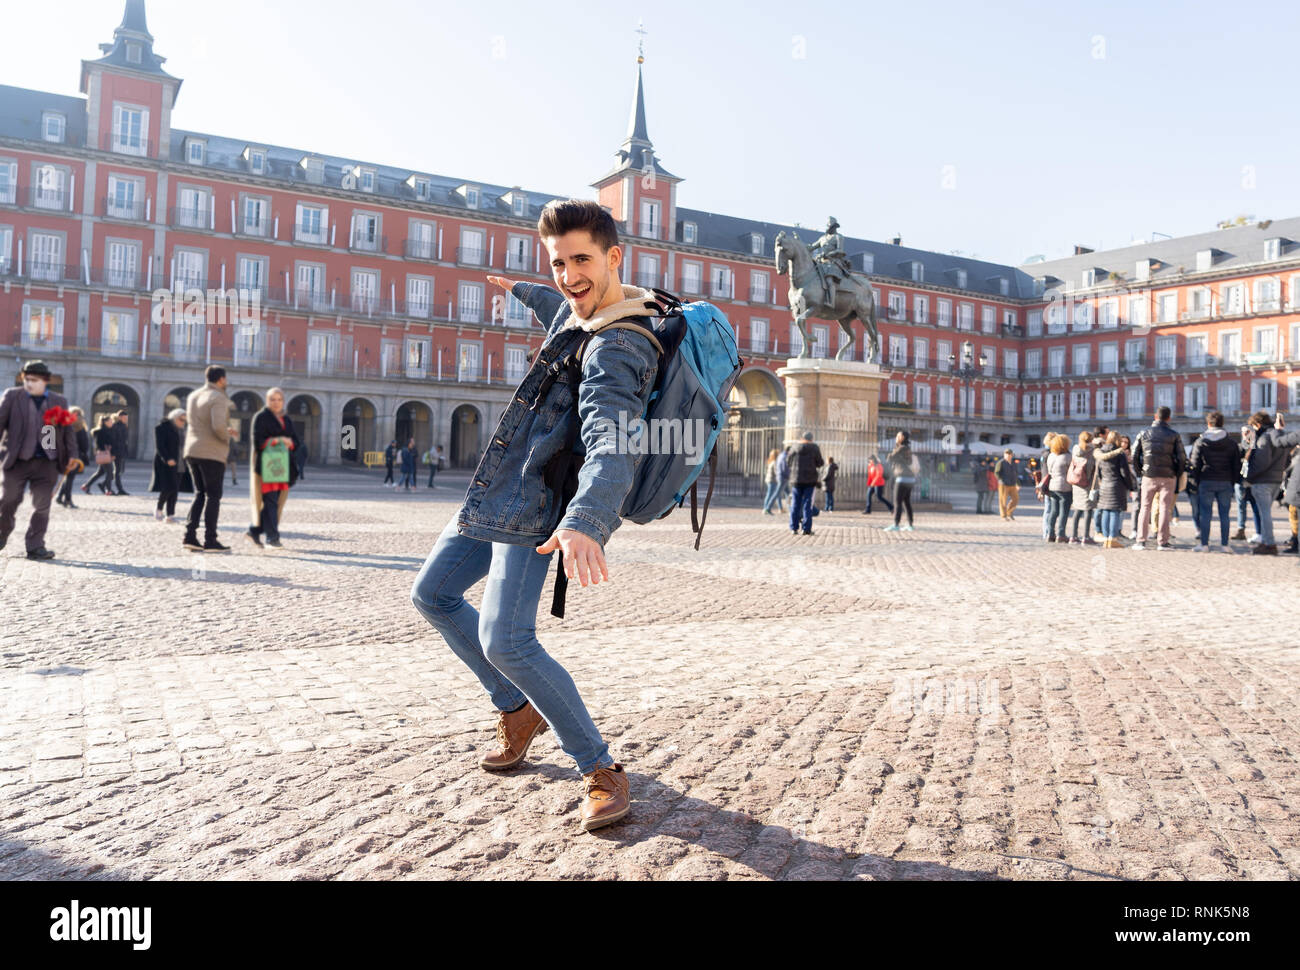 Happy young man traveling around Europe having fun pretending to surf in Plaza de Espa–a, Madrid, Spain. In People Vacations, adventure, backpacking,  Stock Photo